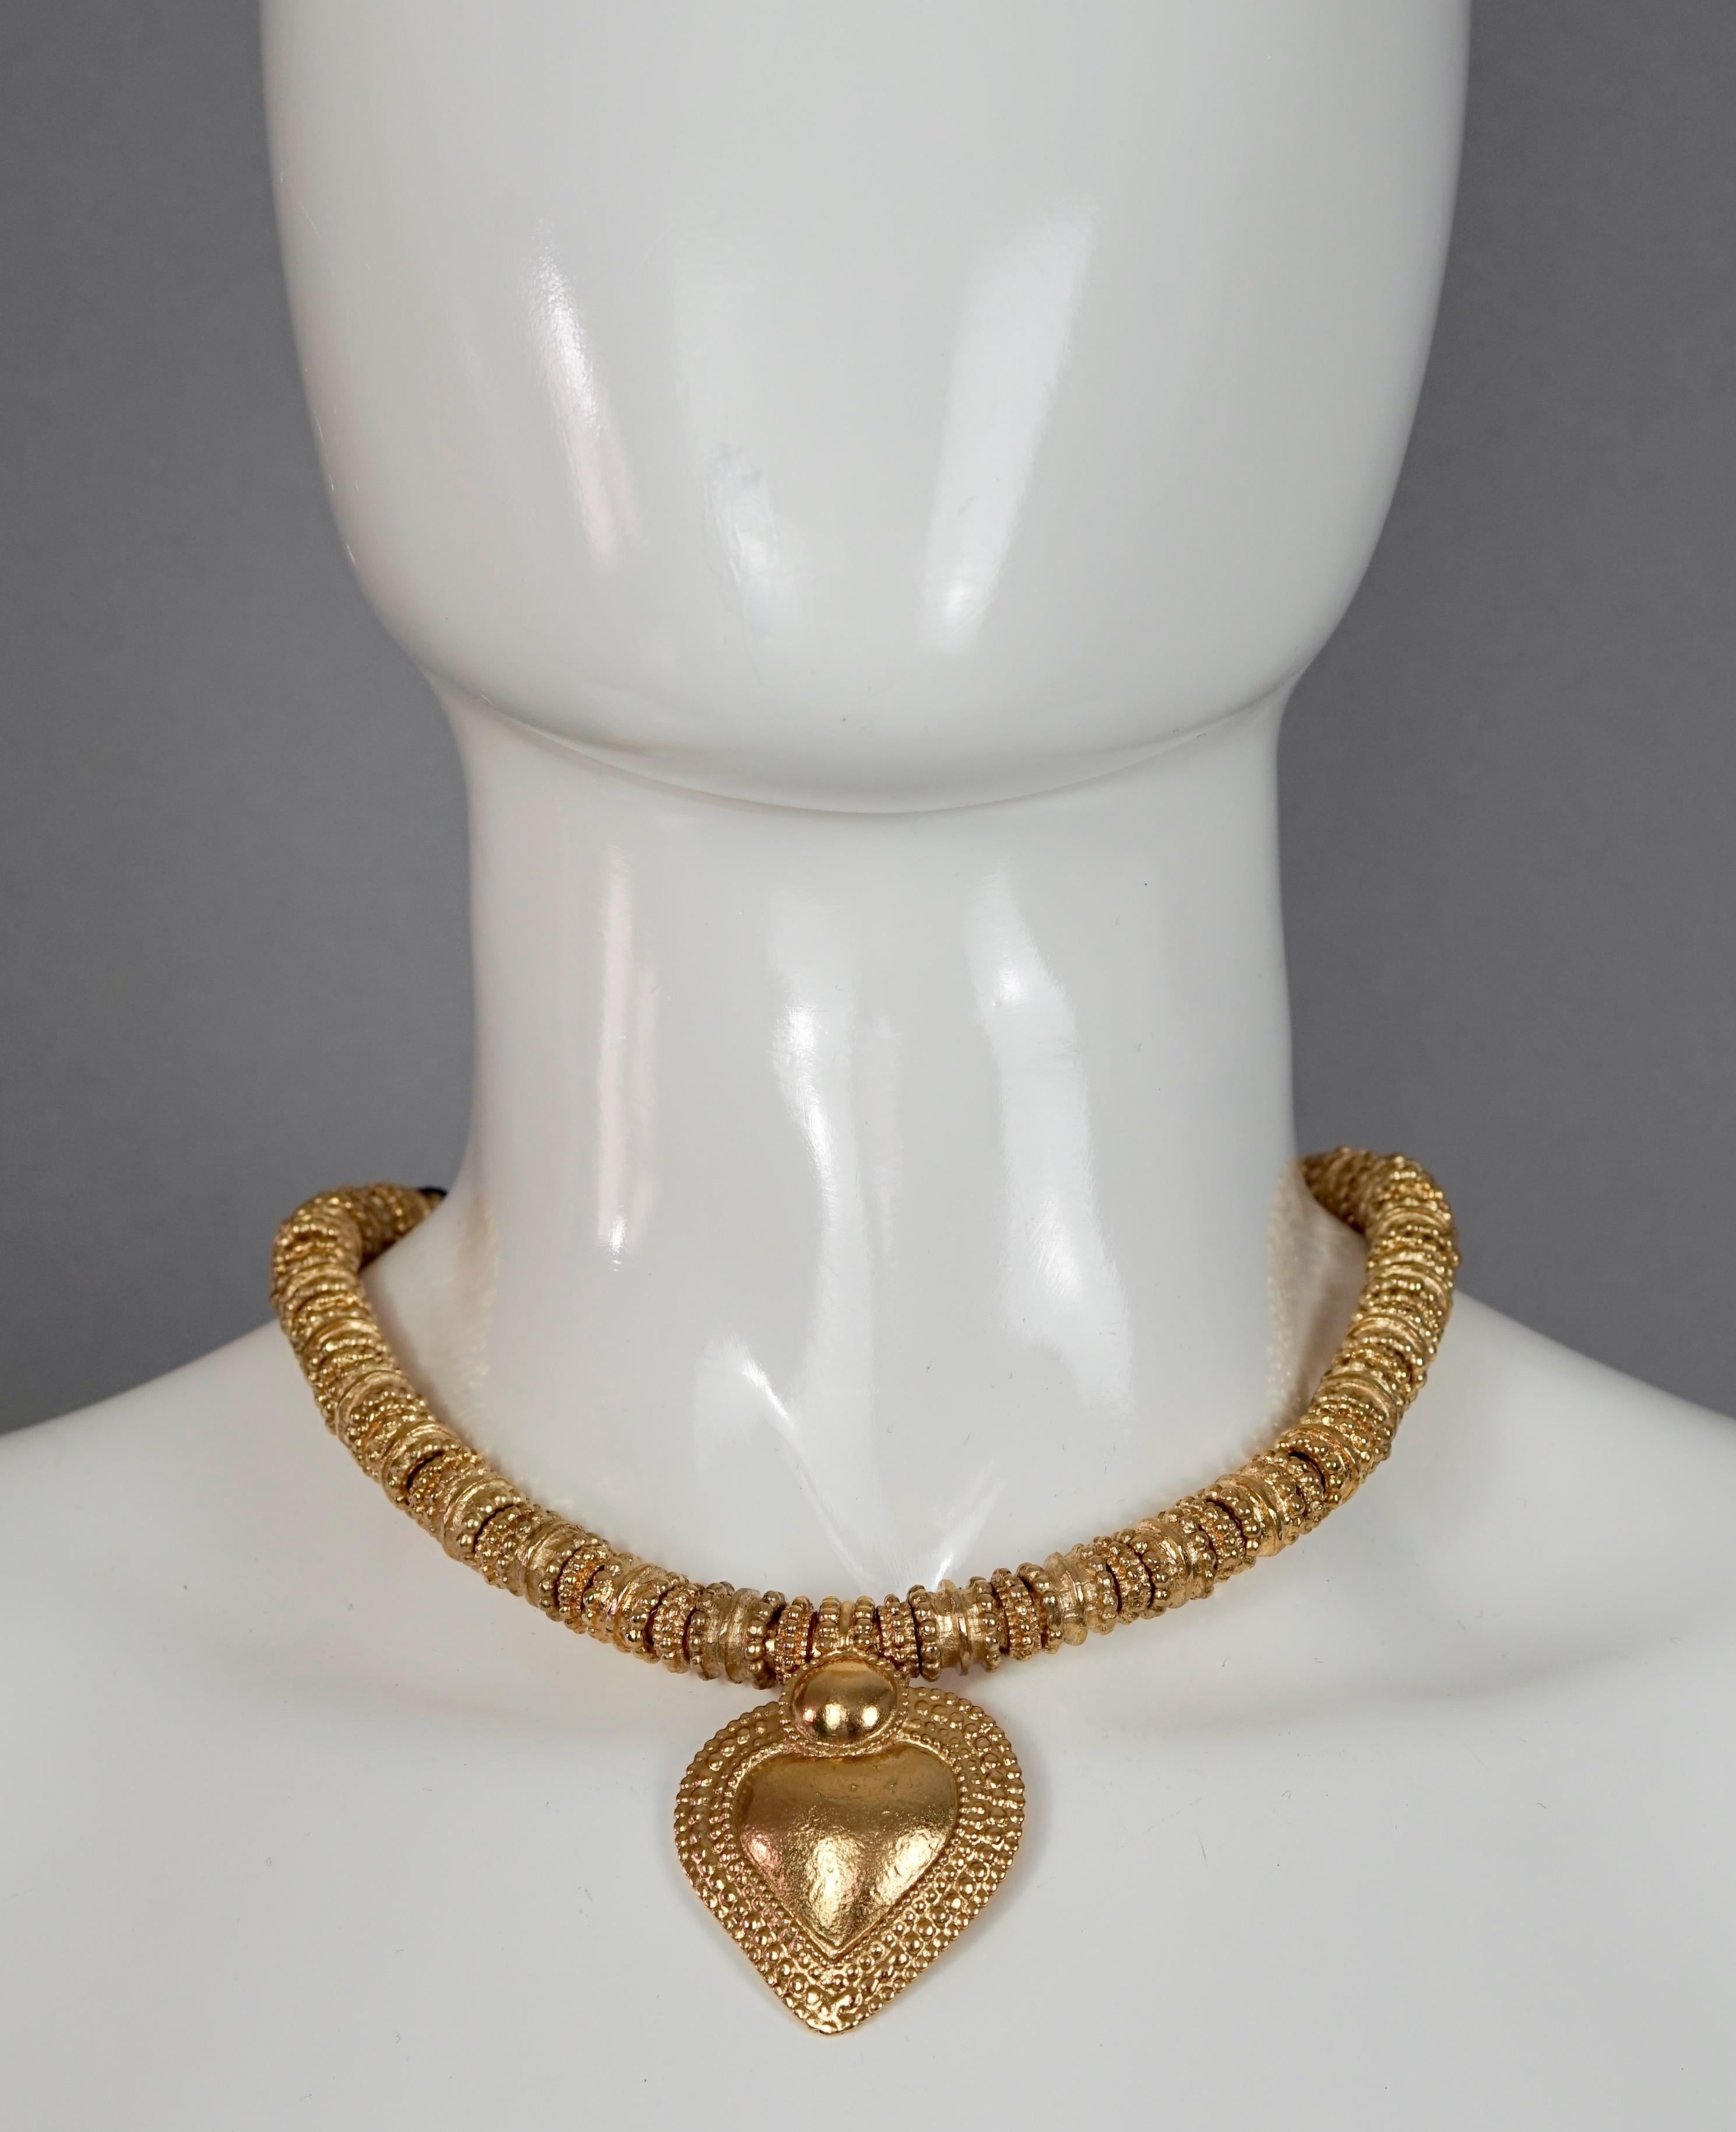 Vintage YVES SAINT LAURENT Ysl Heart Ethnic Link Necklace

Measurements:
Height: 2.08 inches (5.3 cms)
Wearable Length: 17.12 inches (43.5 cms)

Features:
- 100% Authentic YVES SAINT LAURENT by Robert Goossens.
- Ethnic link necklace with heart